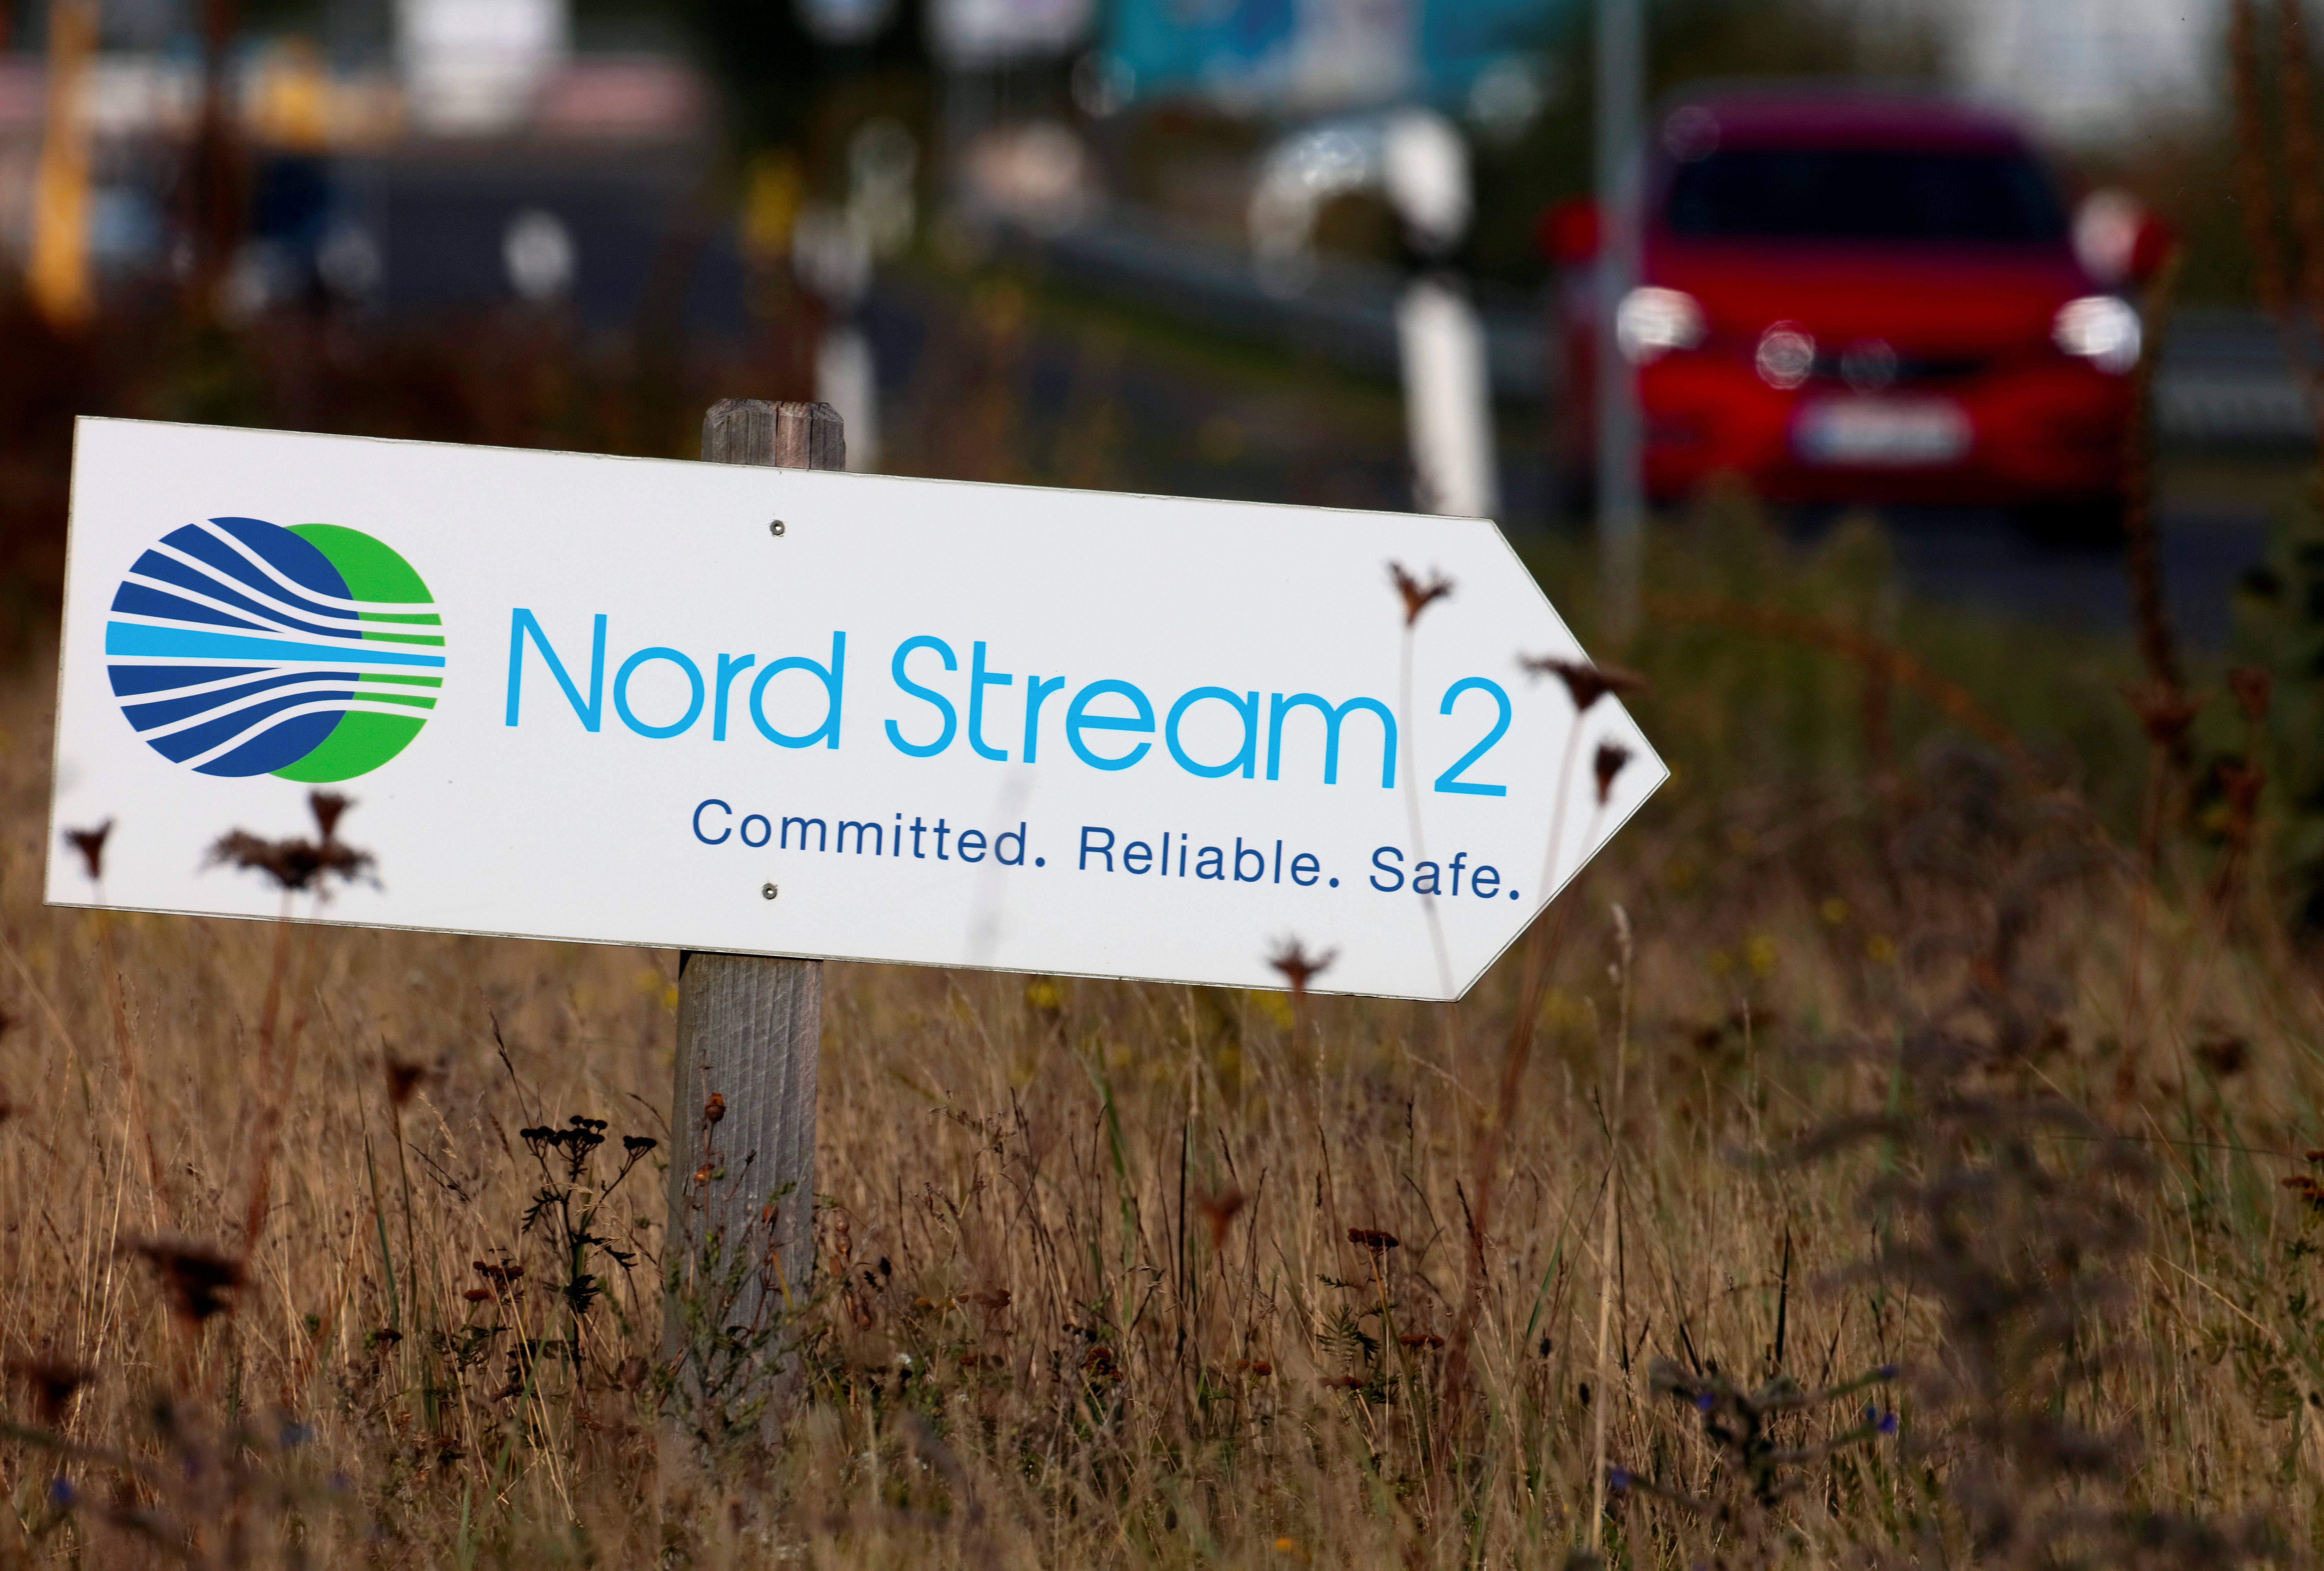 A road sign directs traffic towards the Nord Stream 2 gas line landfall facility entrance in Lubmin, Germany, September 10, 2020. REUTERS/Hannibal Hanschke/File Photo